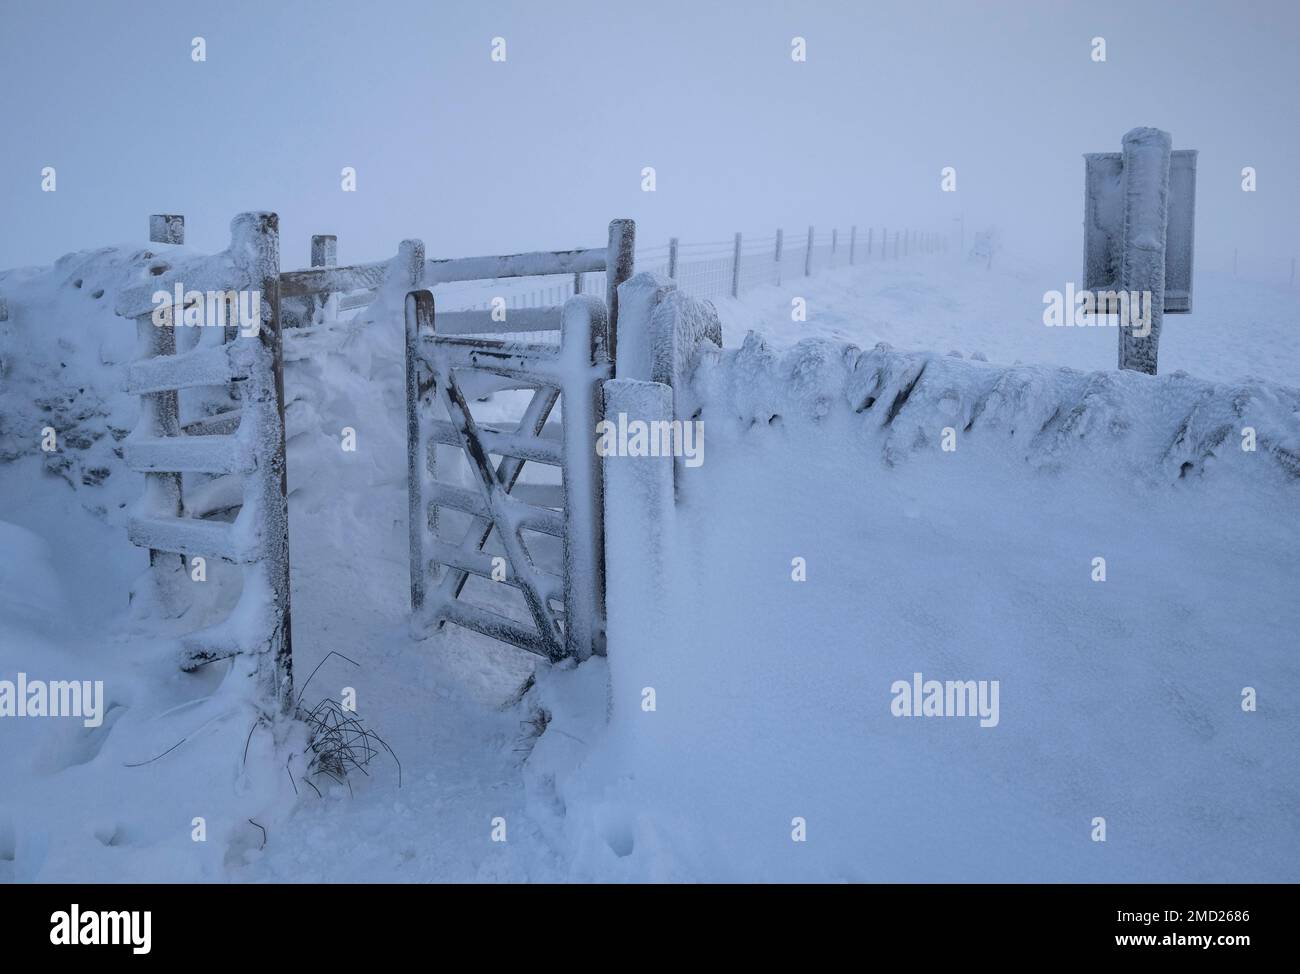 White Out Freezing Conditions on Kissing Gate, Trail to Shining Tor, Cheshire, Peak District National Park, England, UK Stock Photo